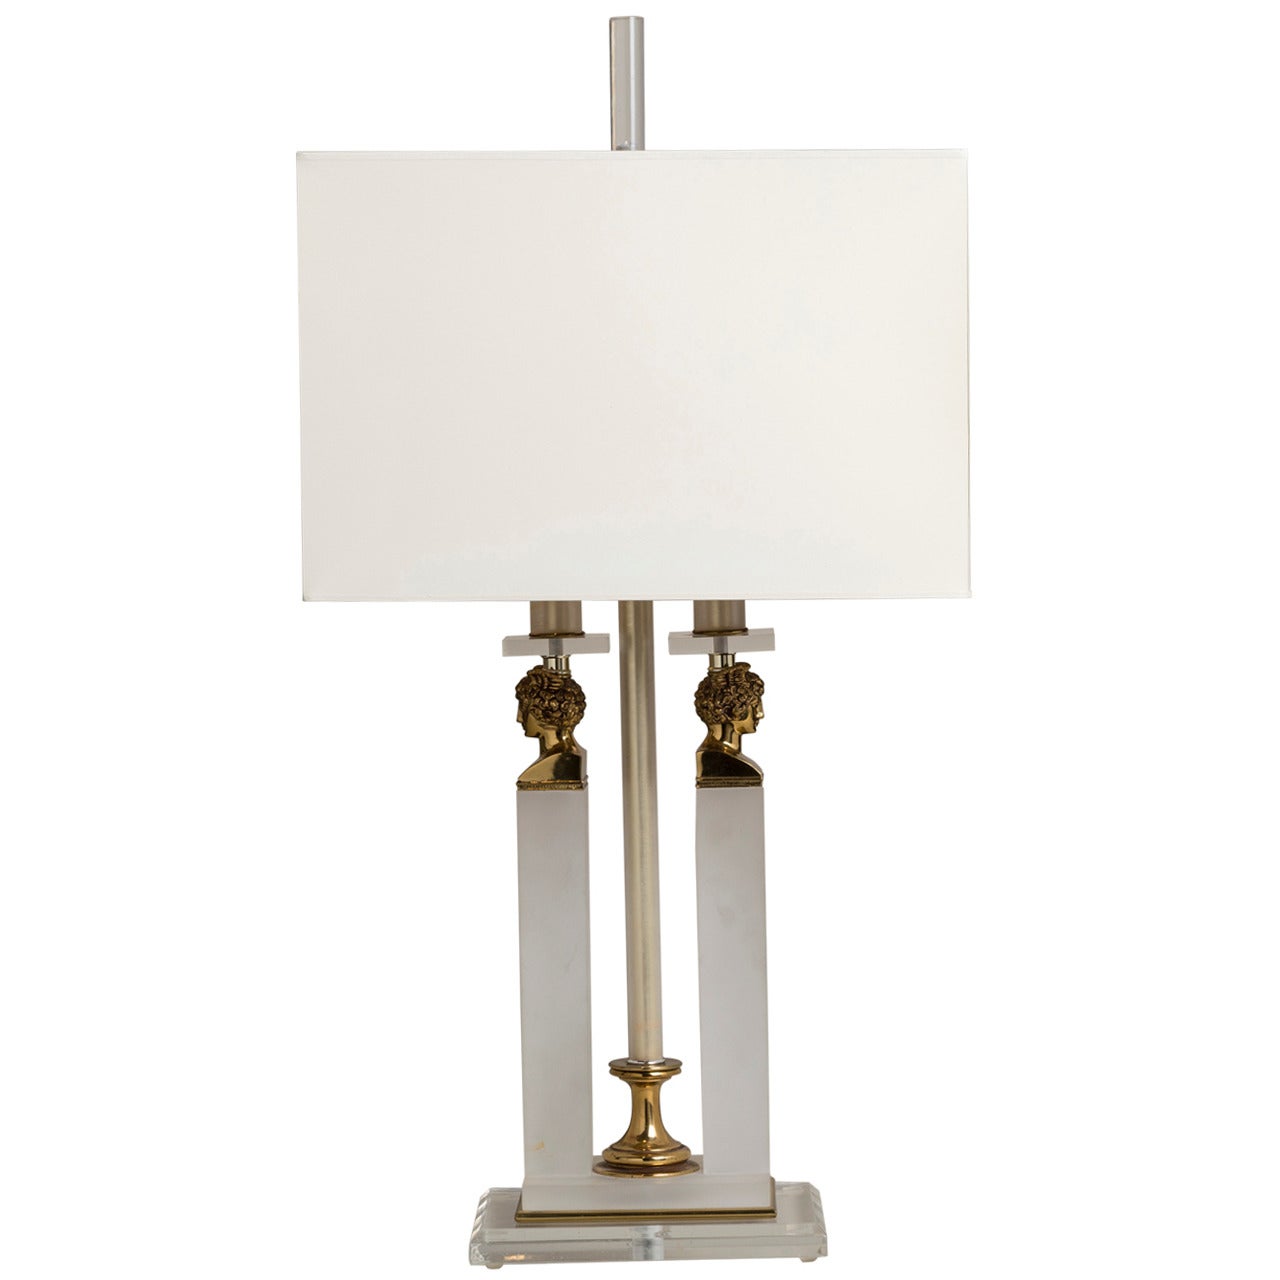 Single Lucite and Brass Neoclassical Style Table Lamp 1970s For Sale